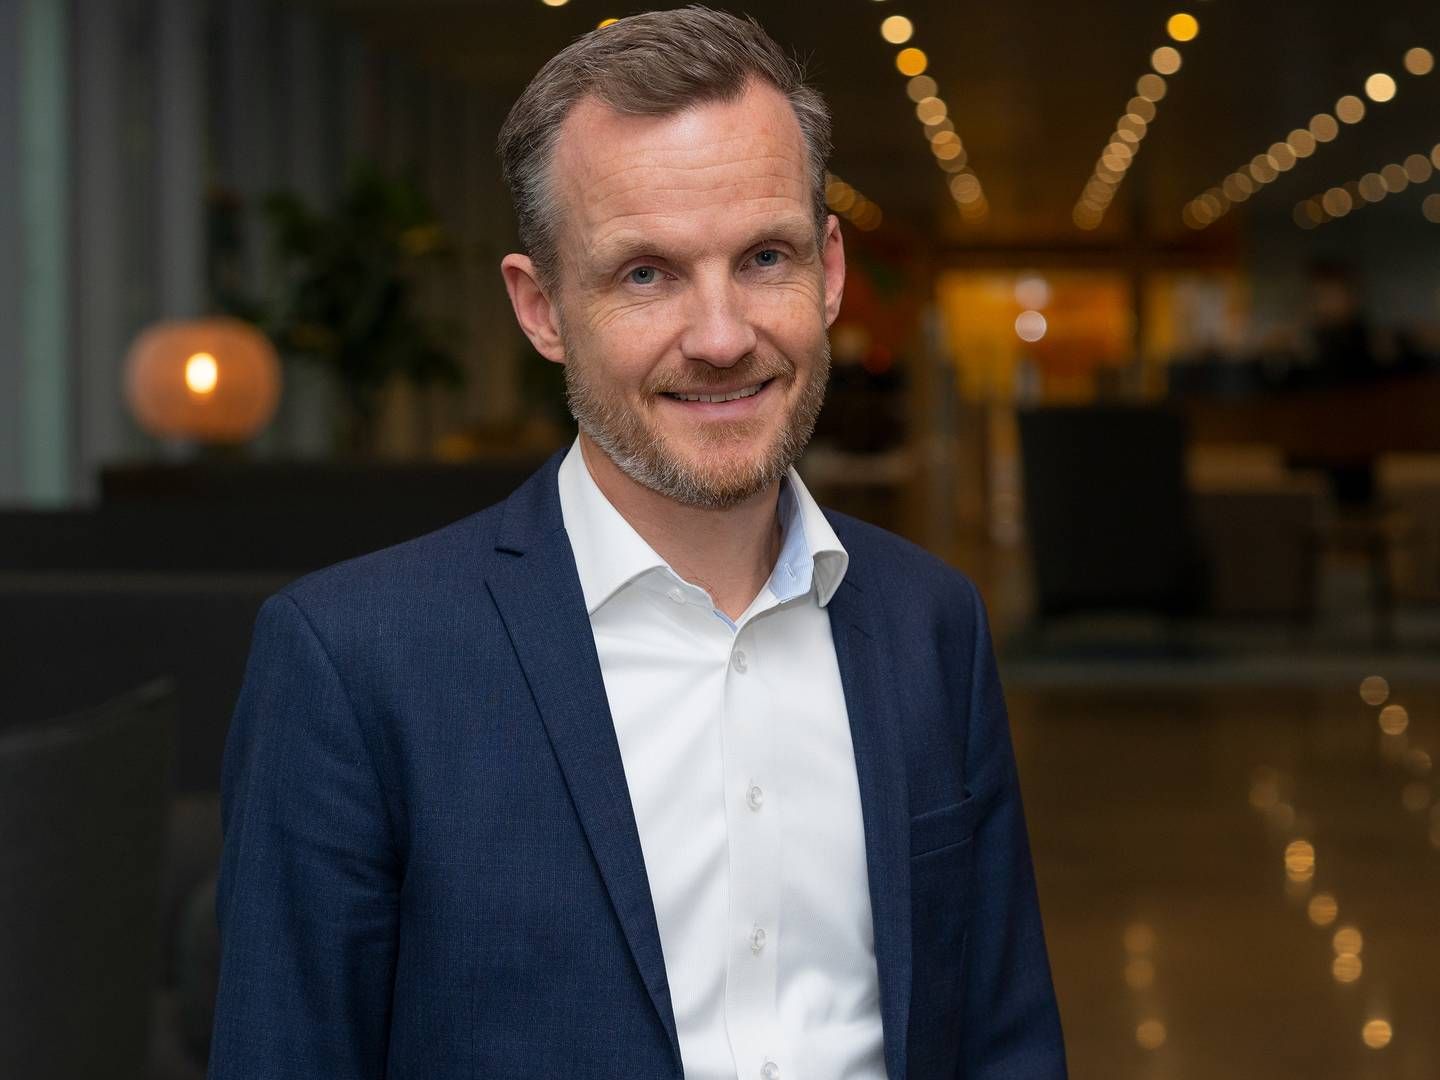 Maersk is disappointed that oil companies are holding back on producing green marine fuels, says Maersk's Head of Decarbonization, Morten Bo Christiansen. | Photo: Maersk PR